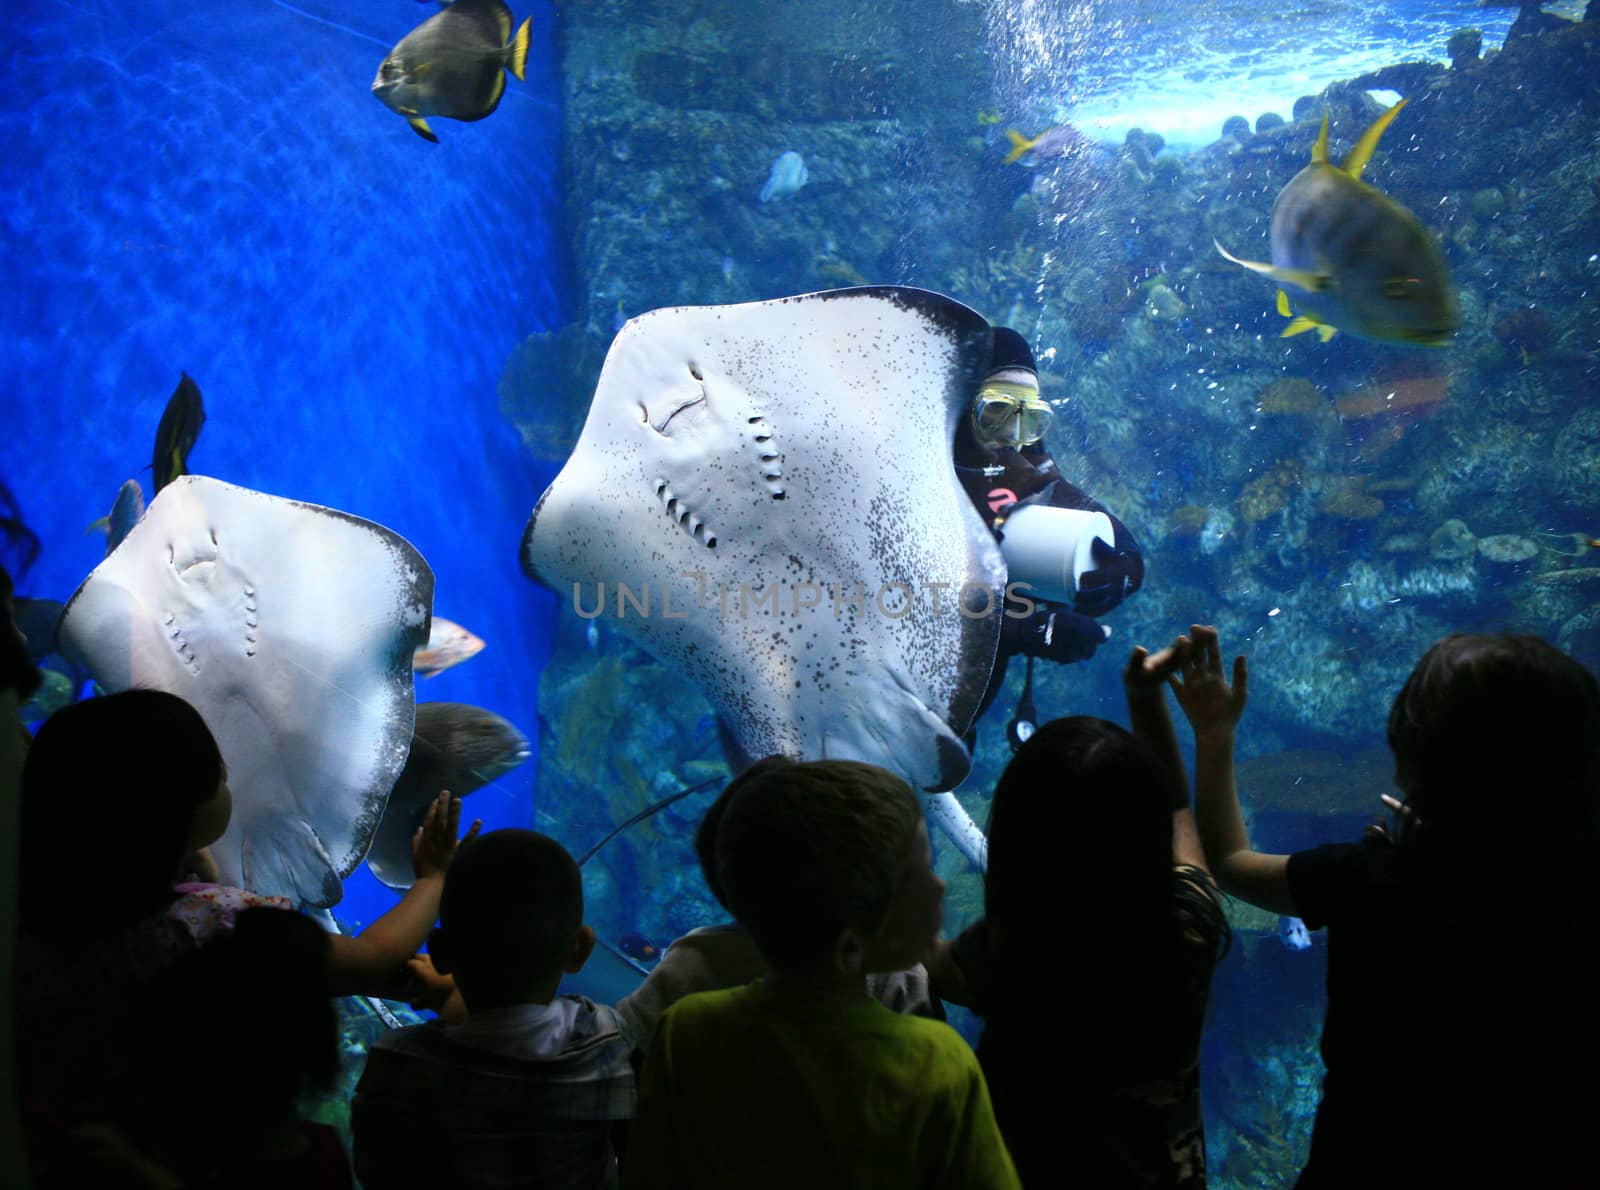 Rays in a Giant Aquarium With Children Watching by tobkatrina